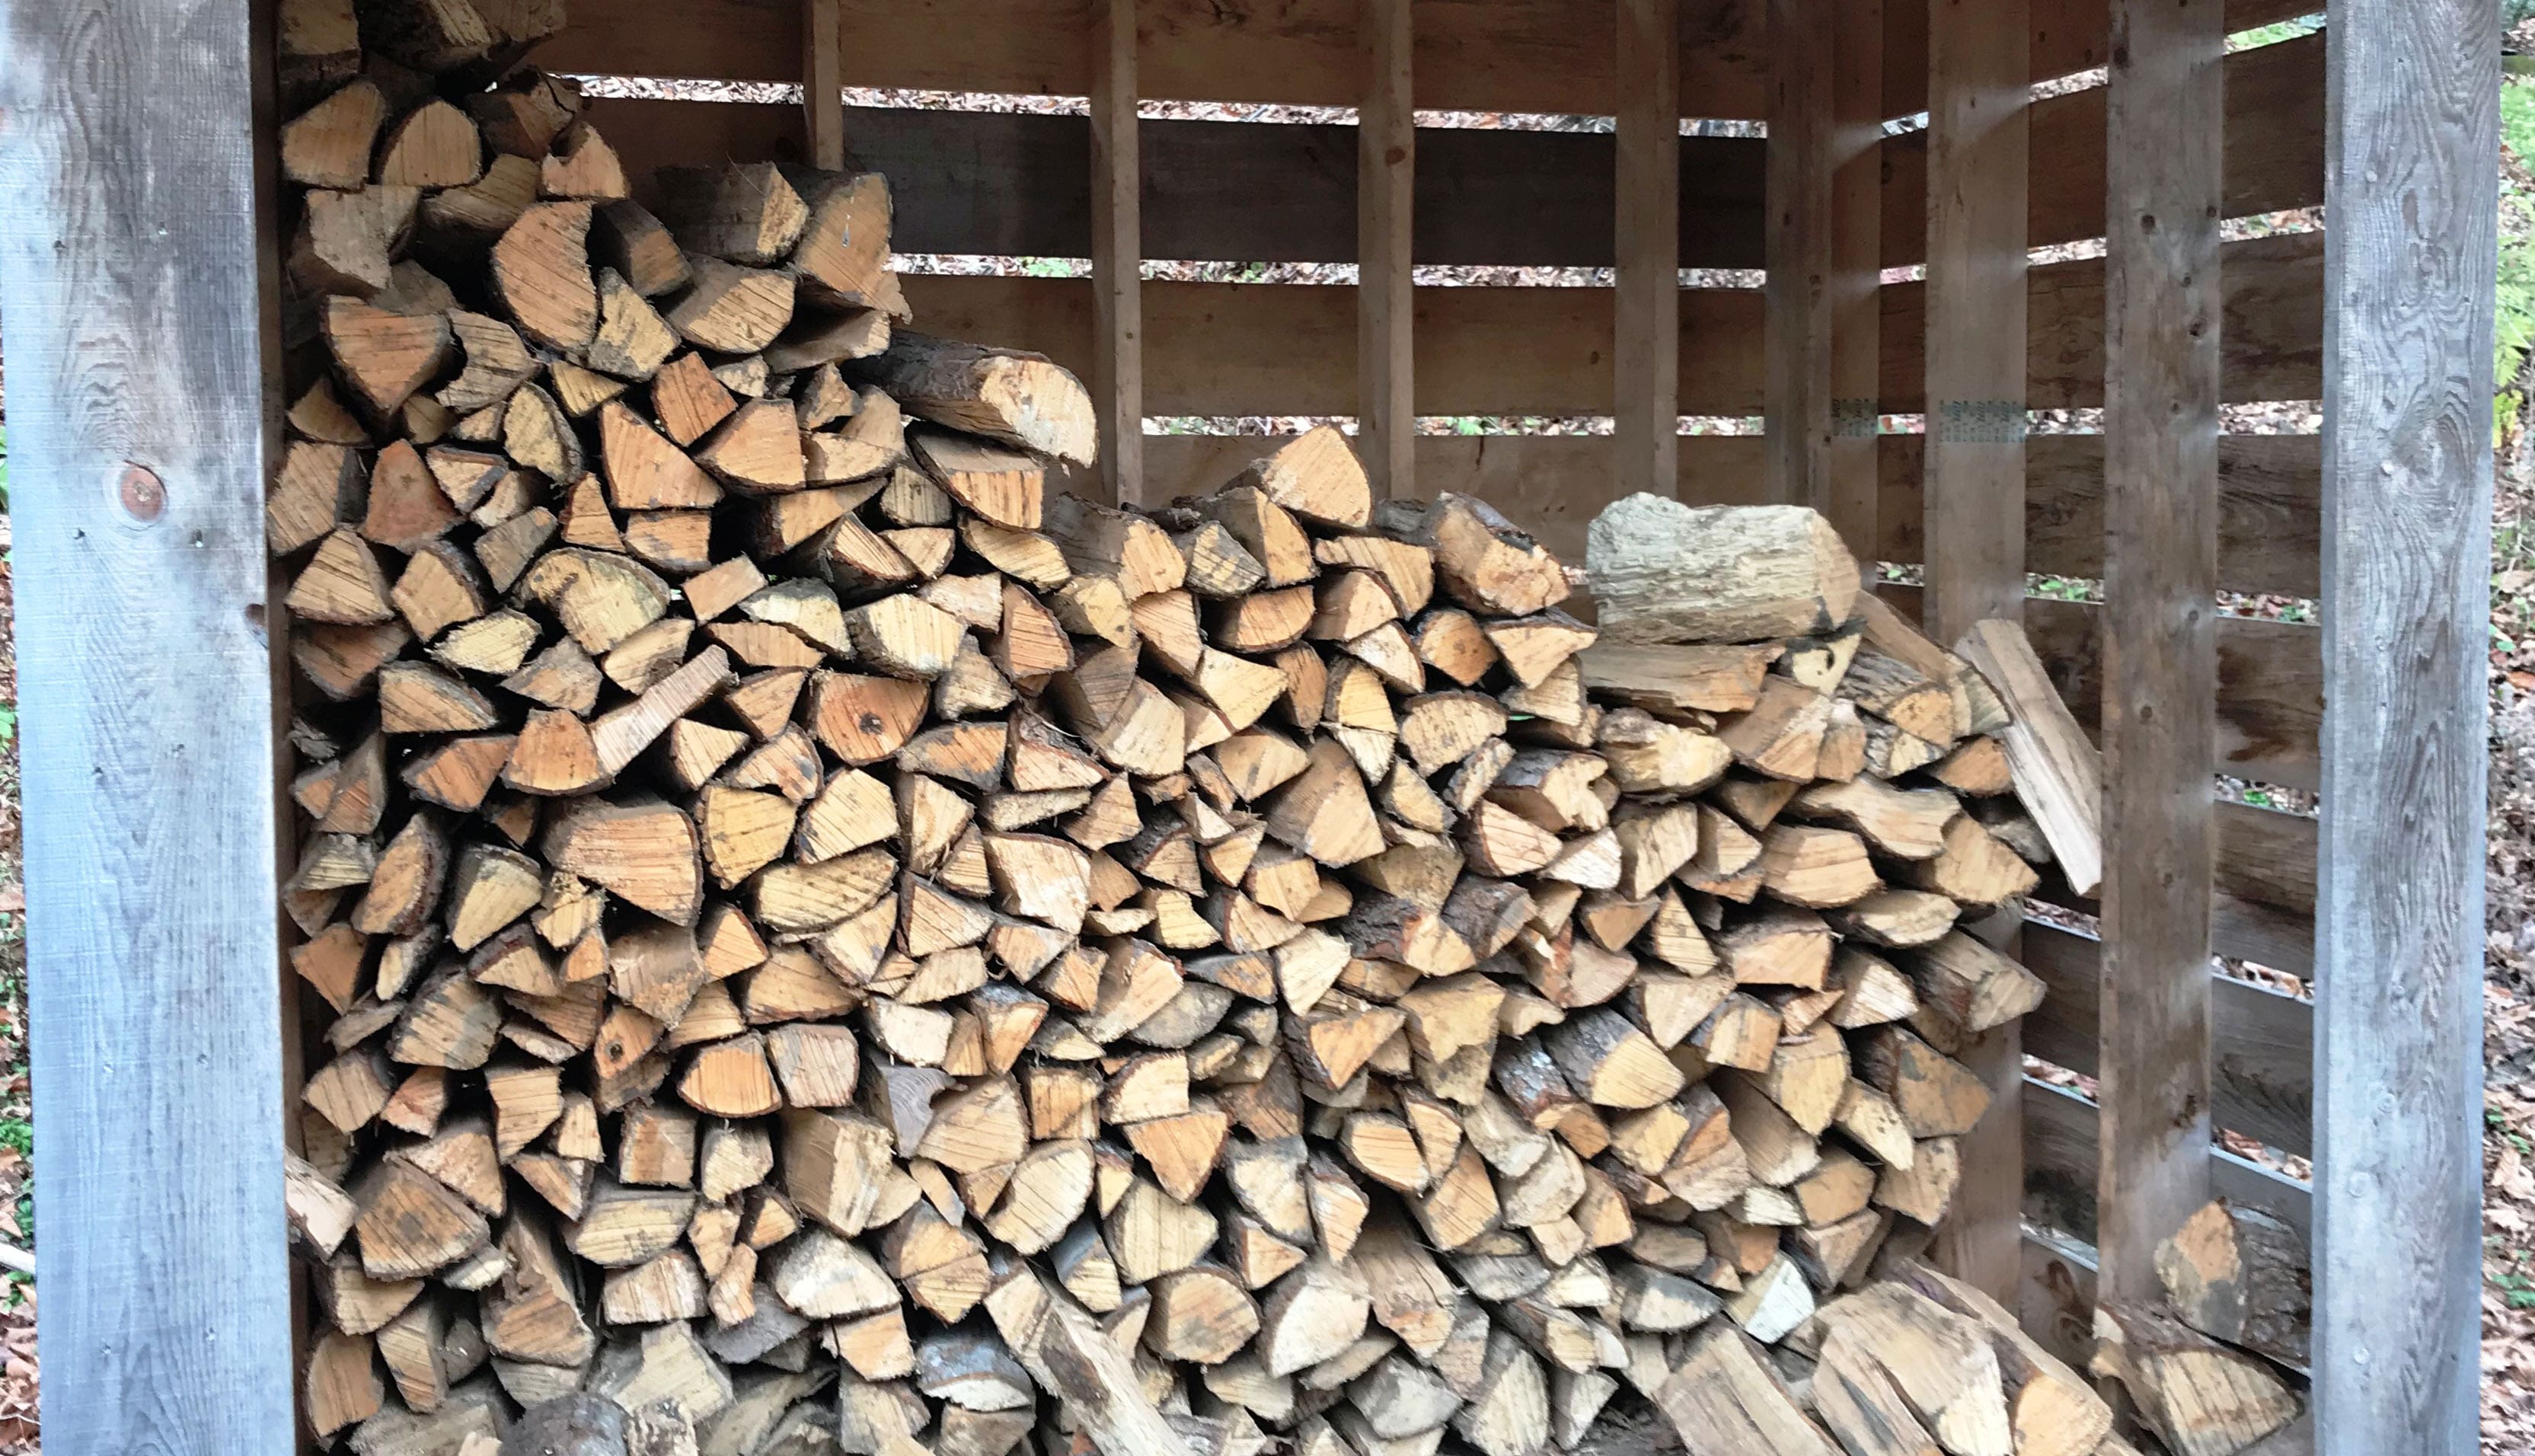 Plenty of wood for the fireplace!